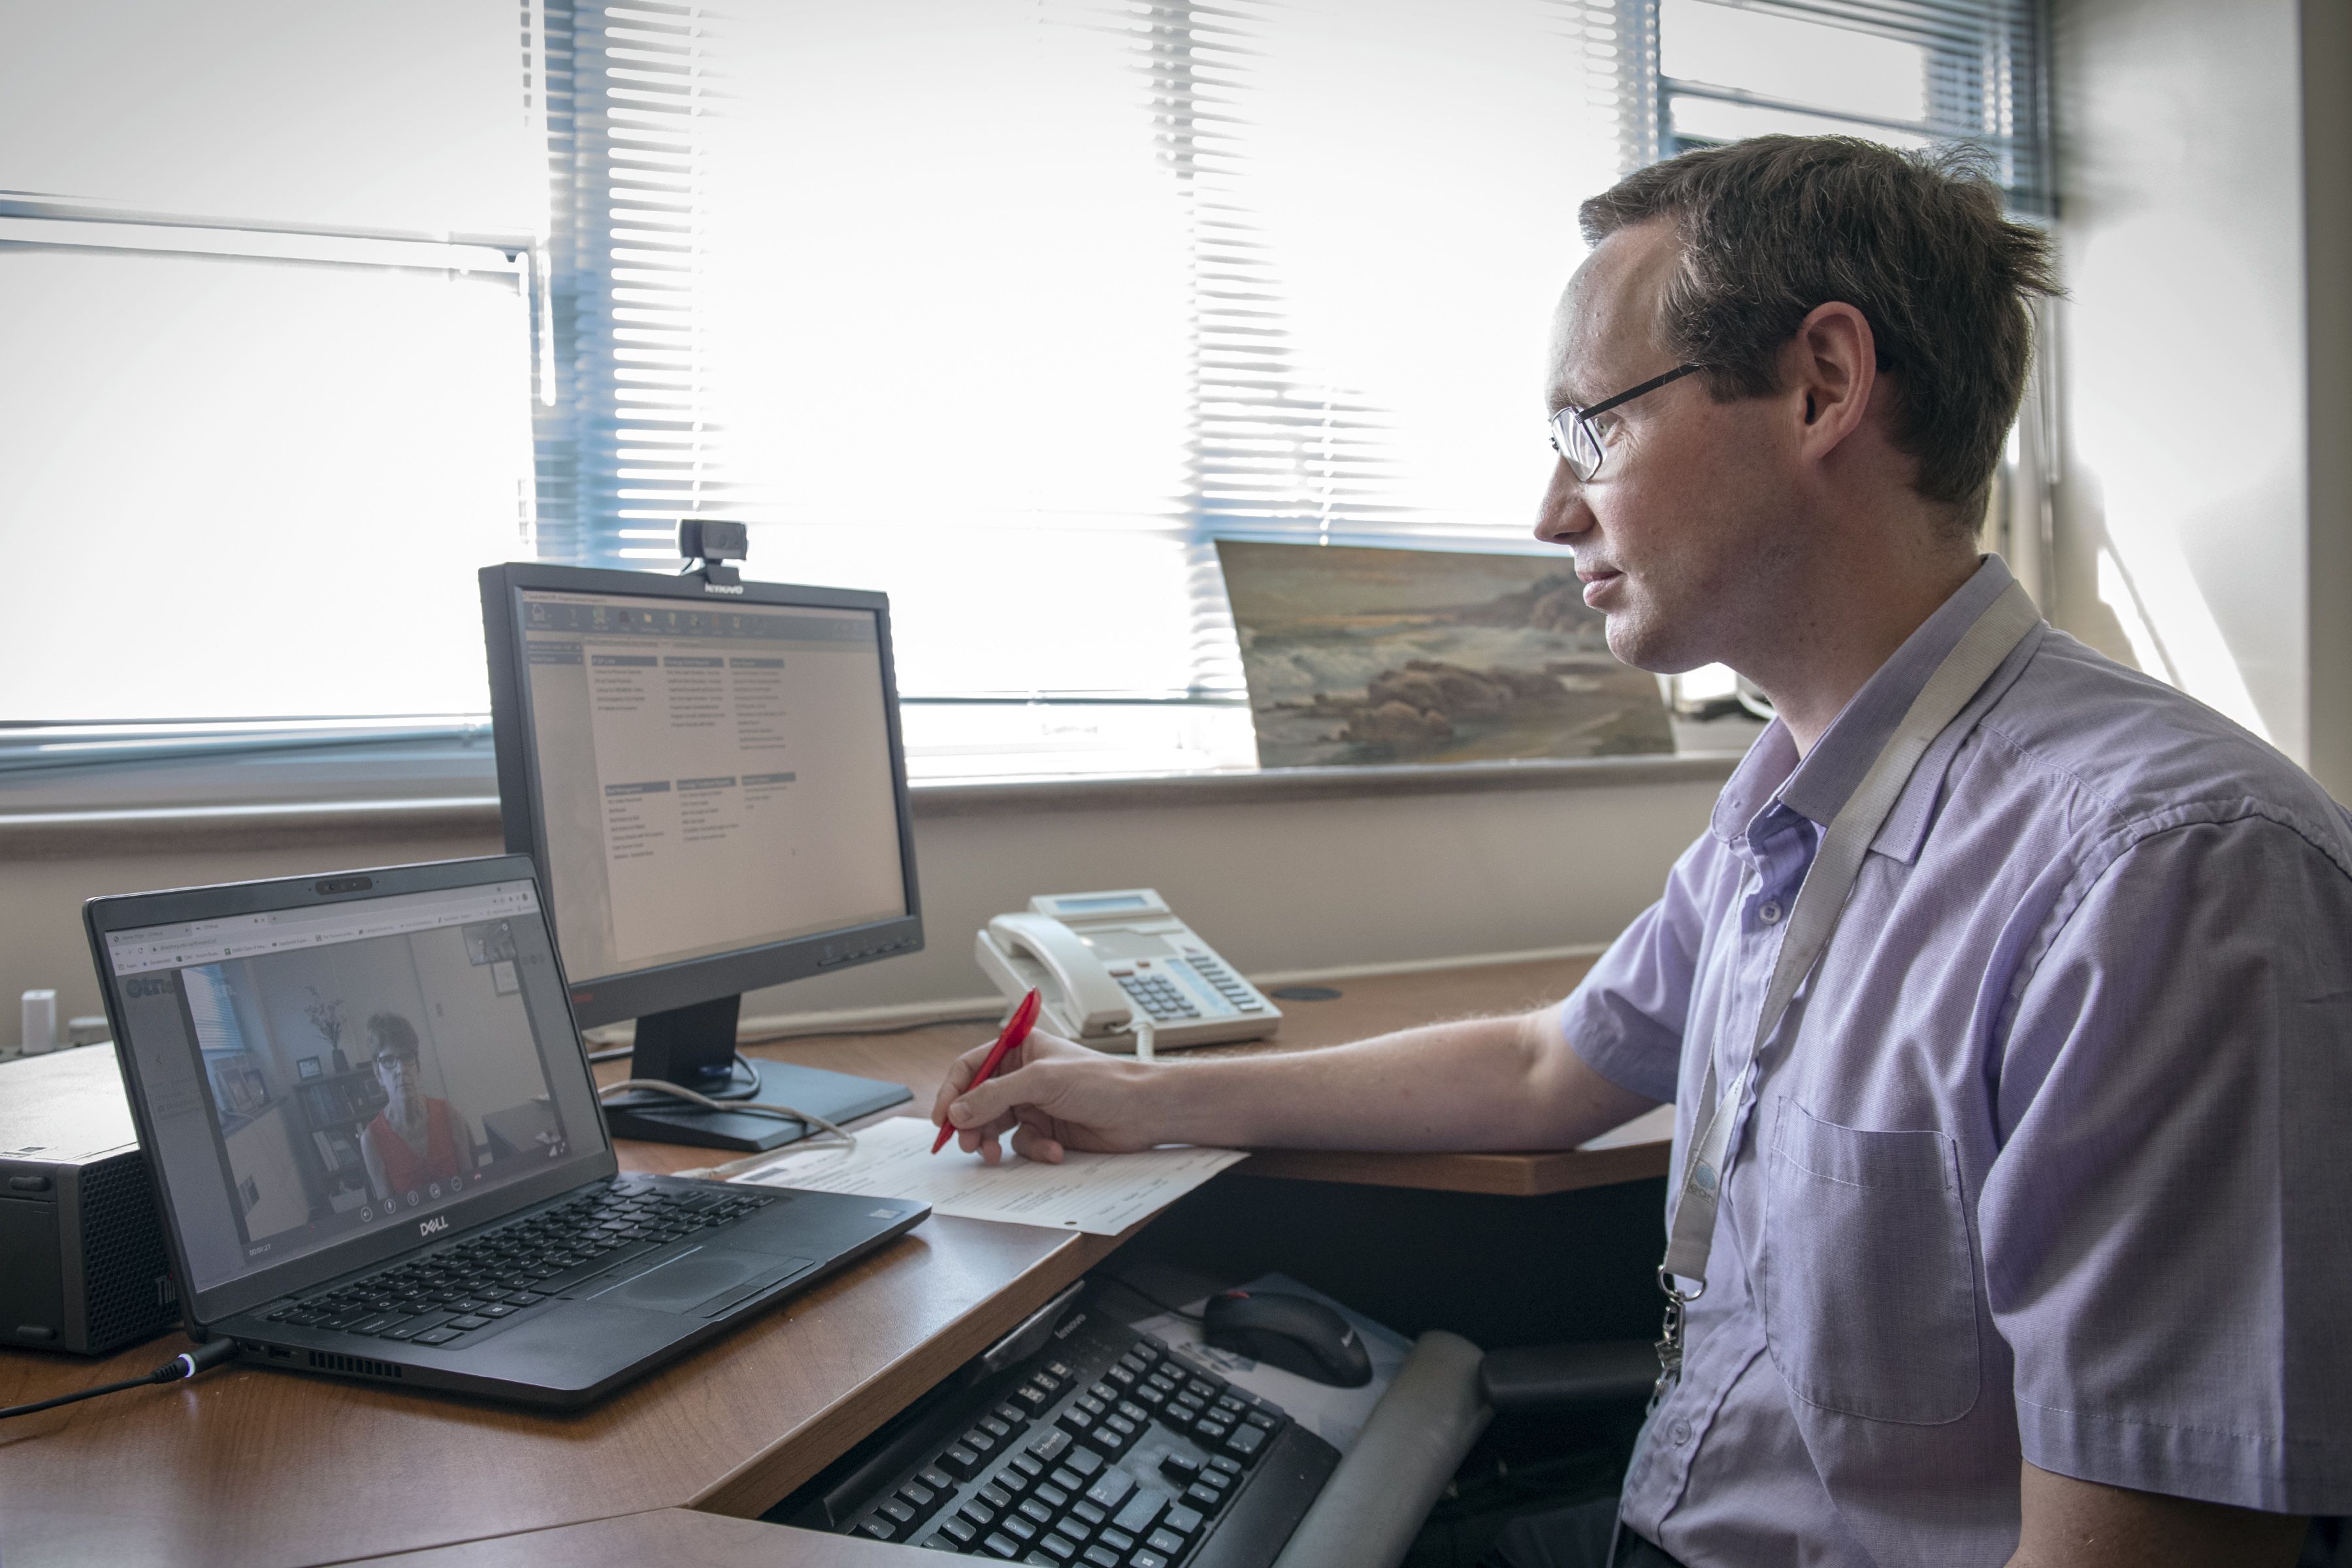 Dr. Gavin Winston was one of several neurologists who took part in the study of virtual care for patients with epilepsyDr. Gavin Winston was one of several neurologists who took part in the study of virtual care for patients with epilepsy